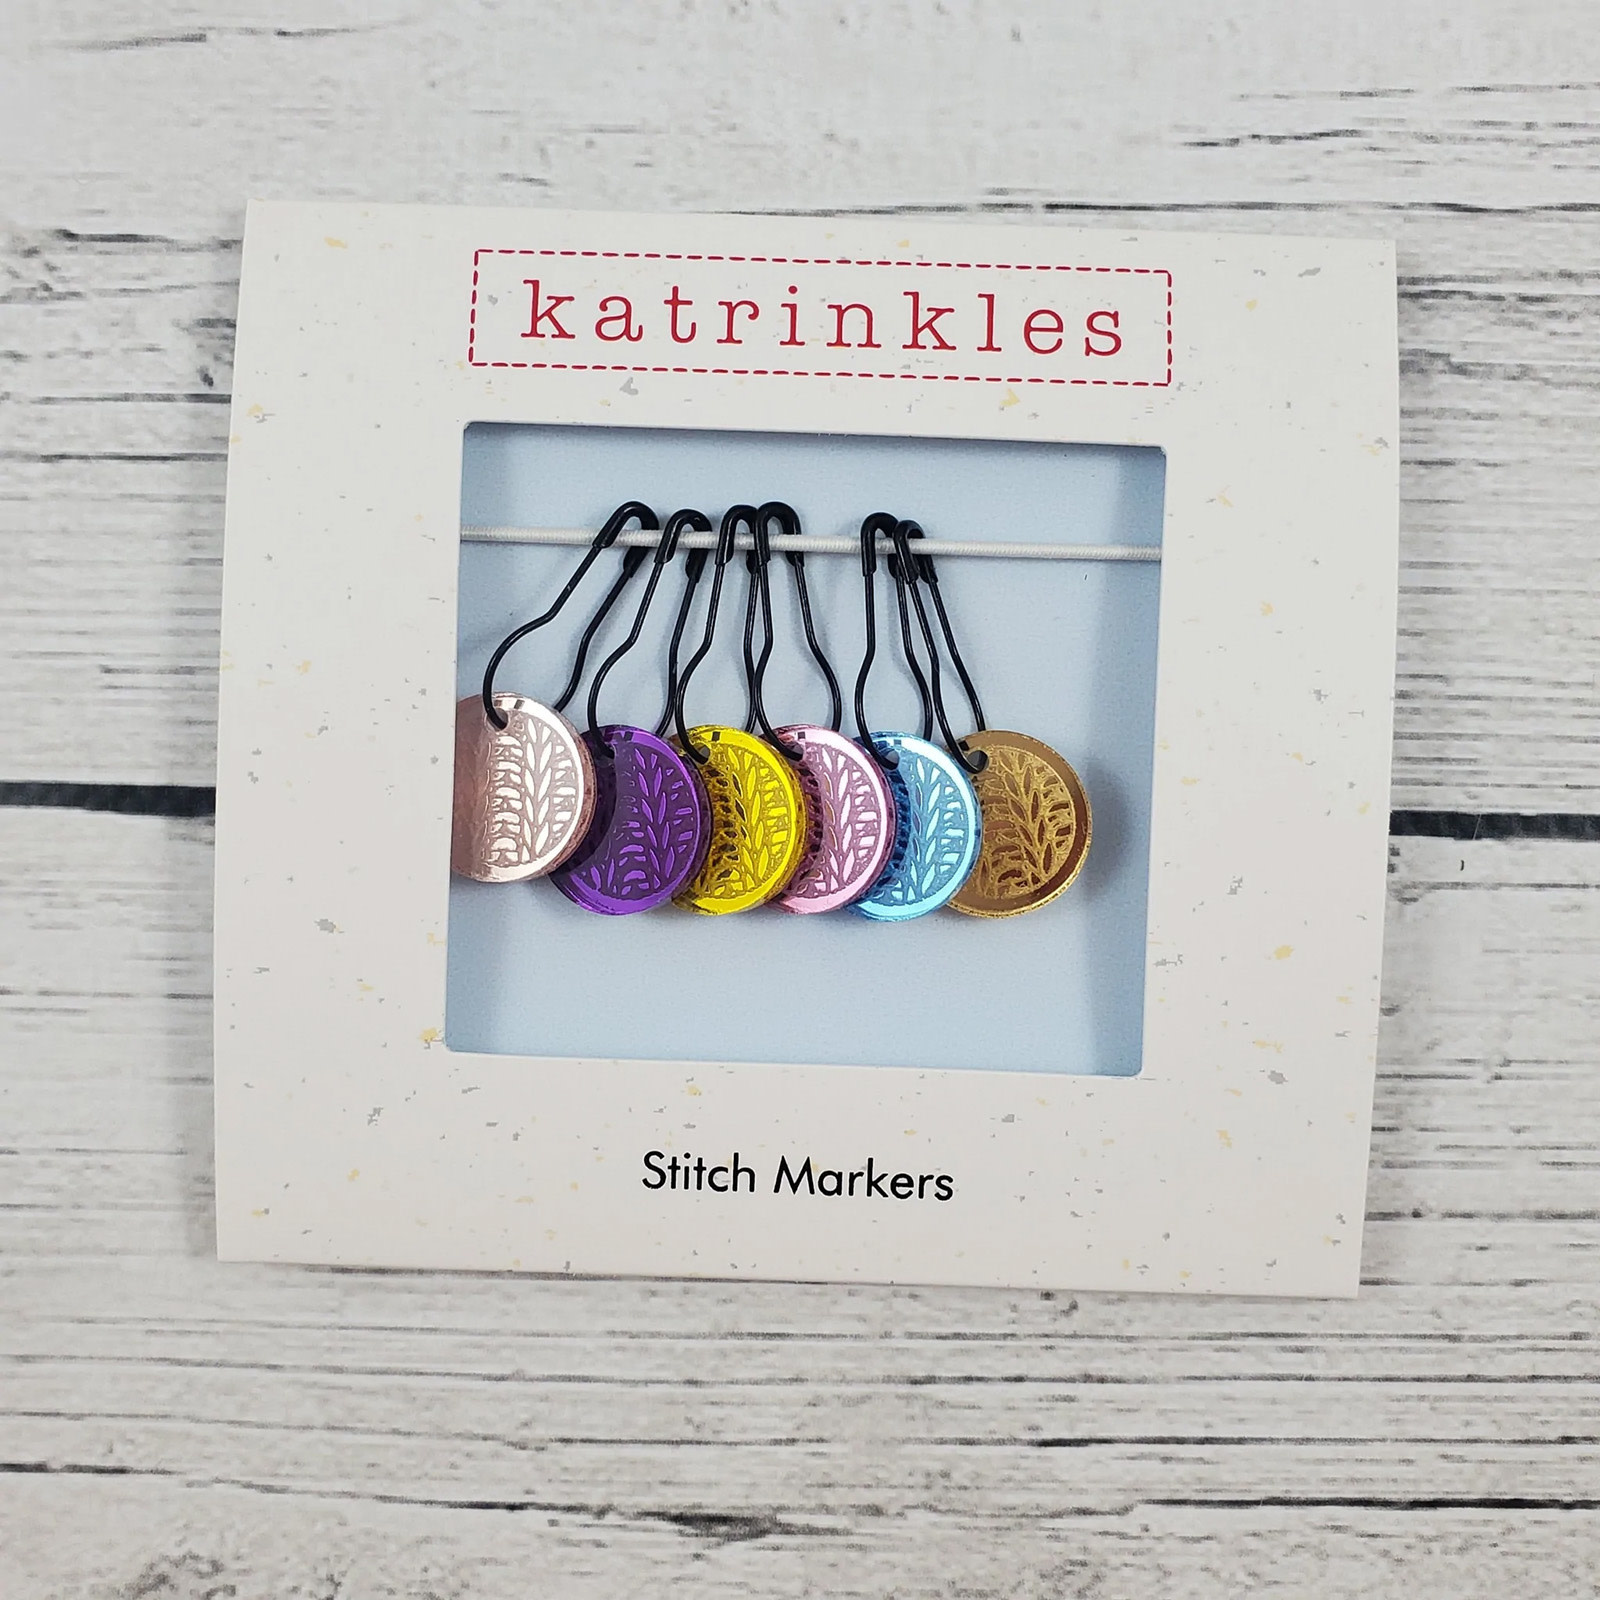 Star and Row Stitch Markers